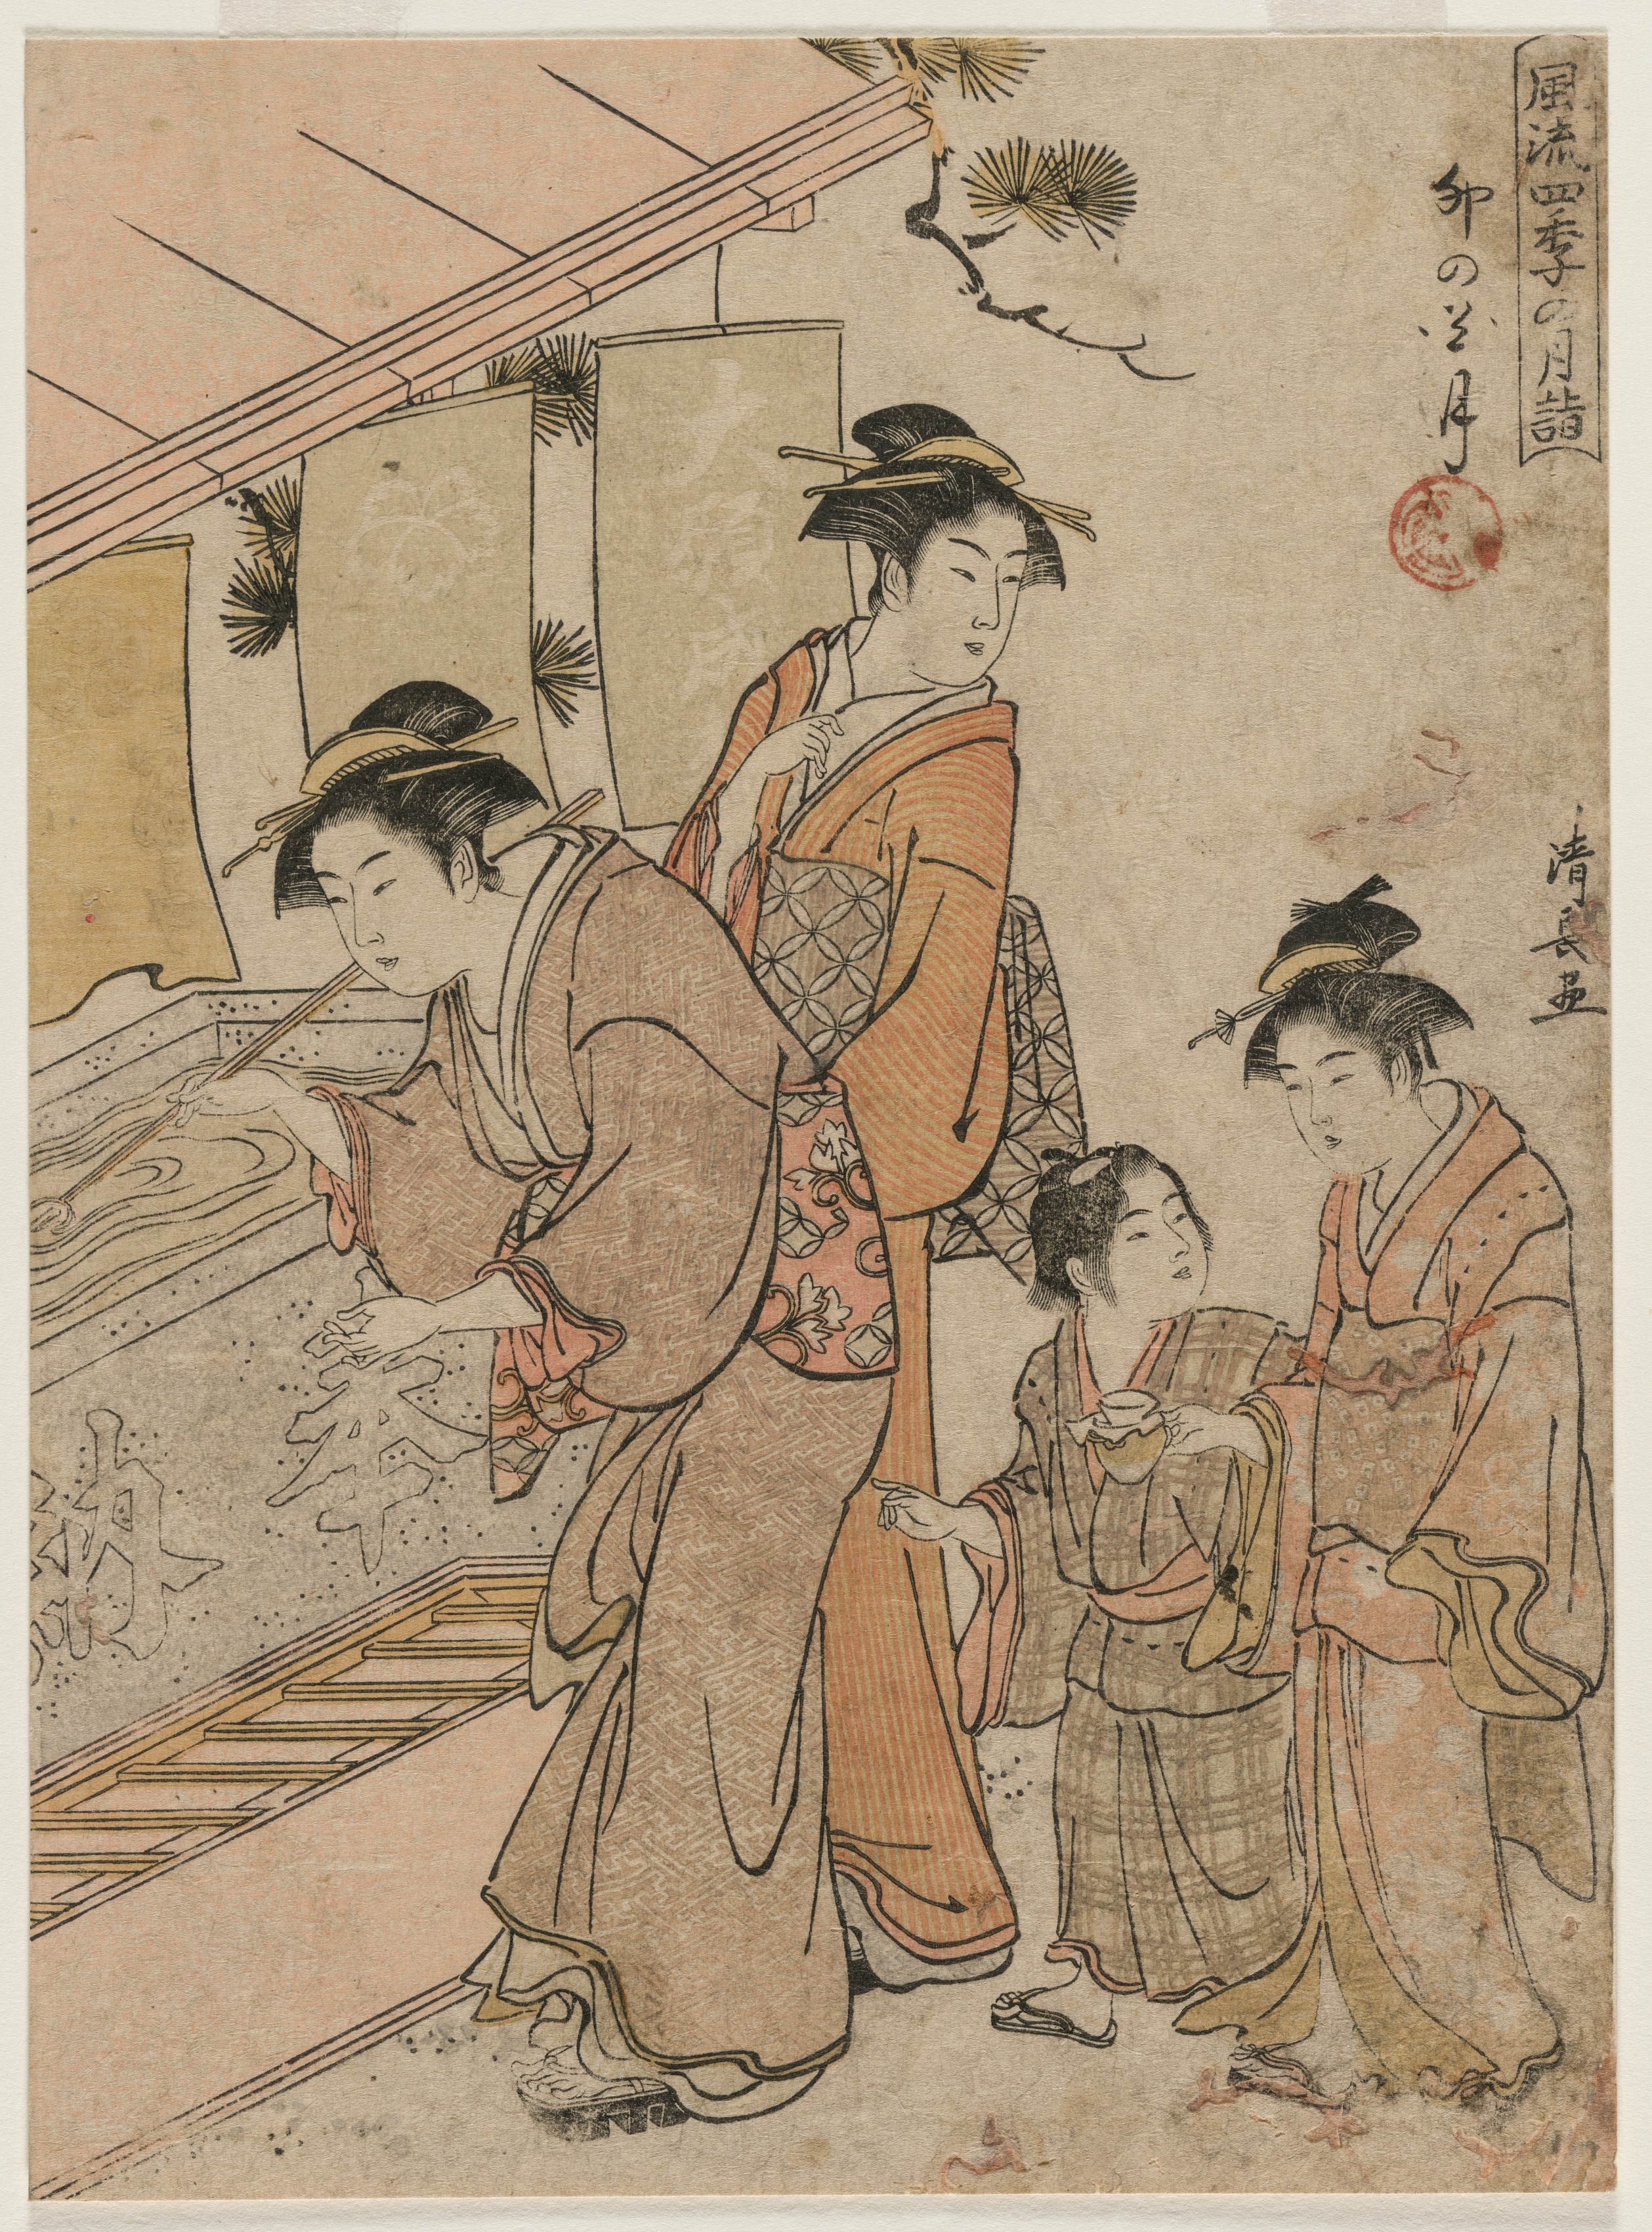 The Fourth Month (from the series Fashionable Monthly Visits to Temples in the Four Seasons)